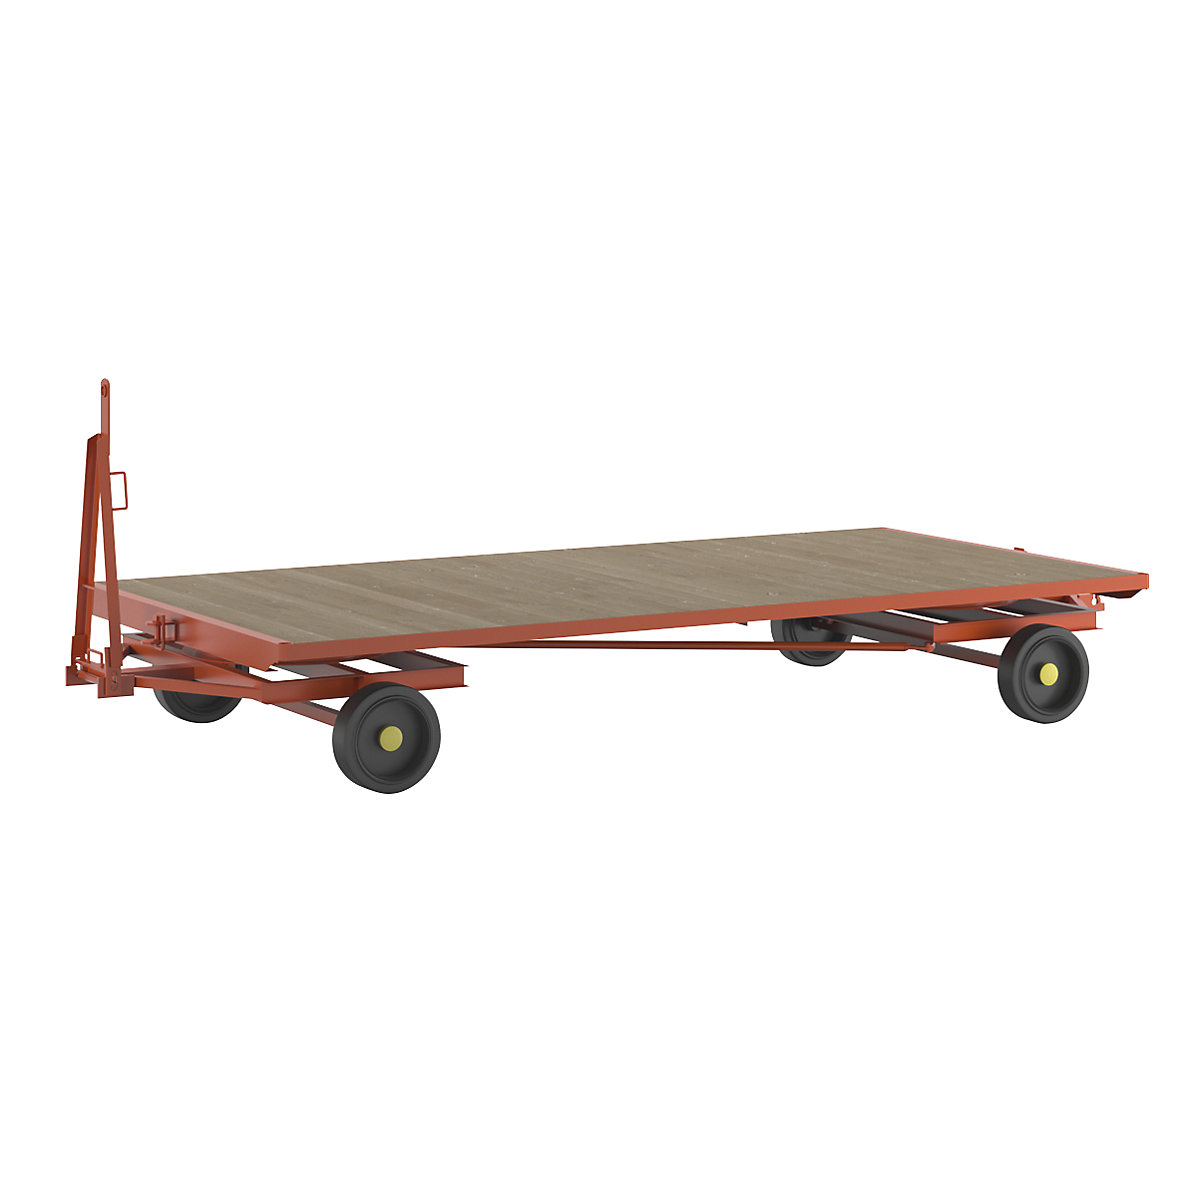 Trailer, 4-wheel double turntable steering, max. load 5 t, platform 4.0 x 2.0 m, solid rubber tyres-14